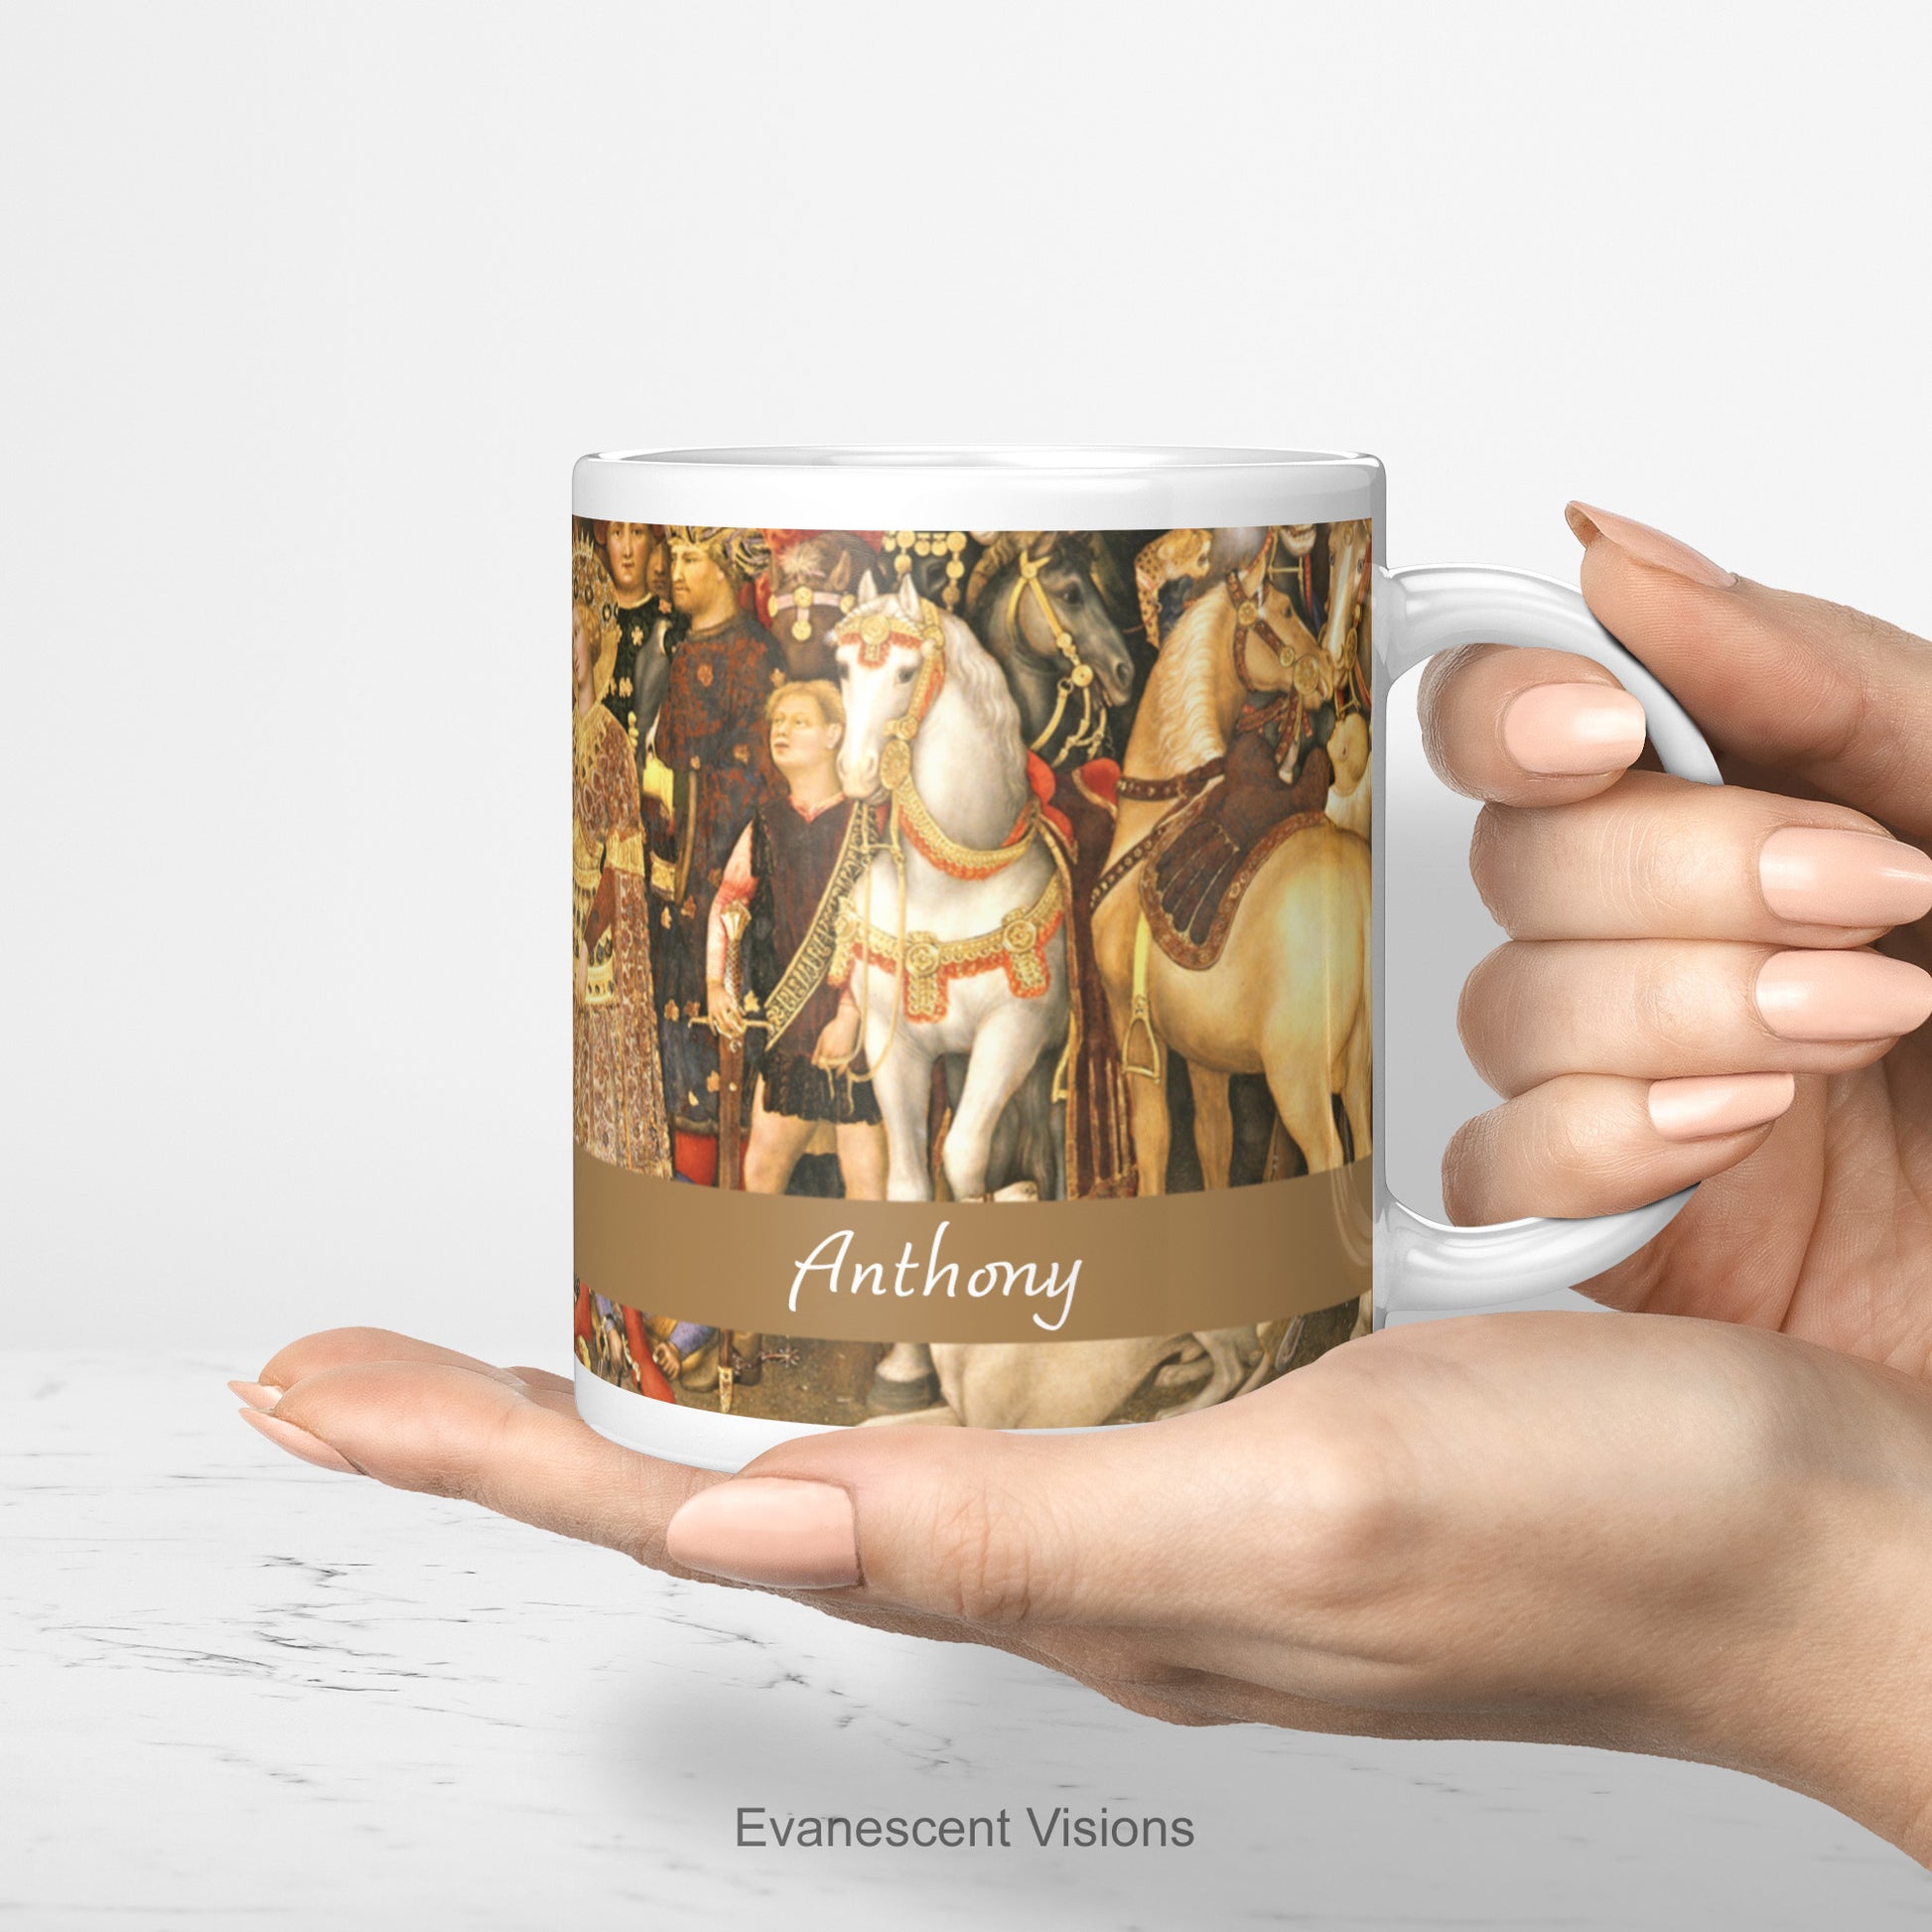 Adoration of the Magi nativity scene personalised ceramic mug, being held in a woman's hand